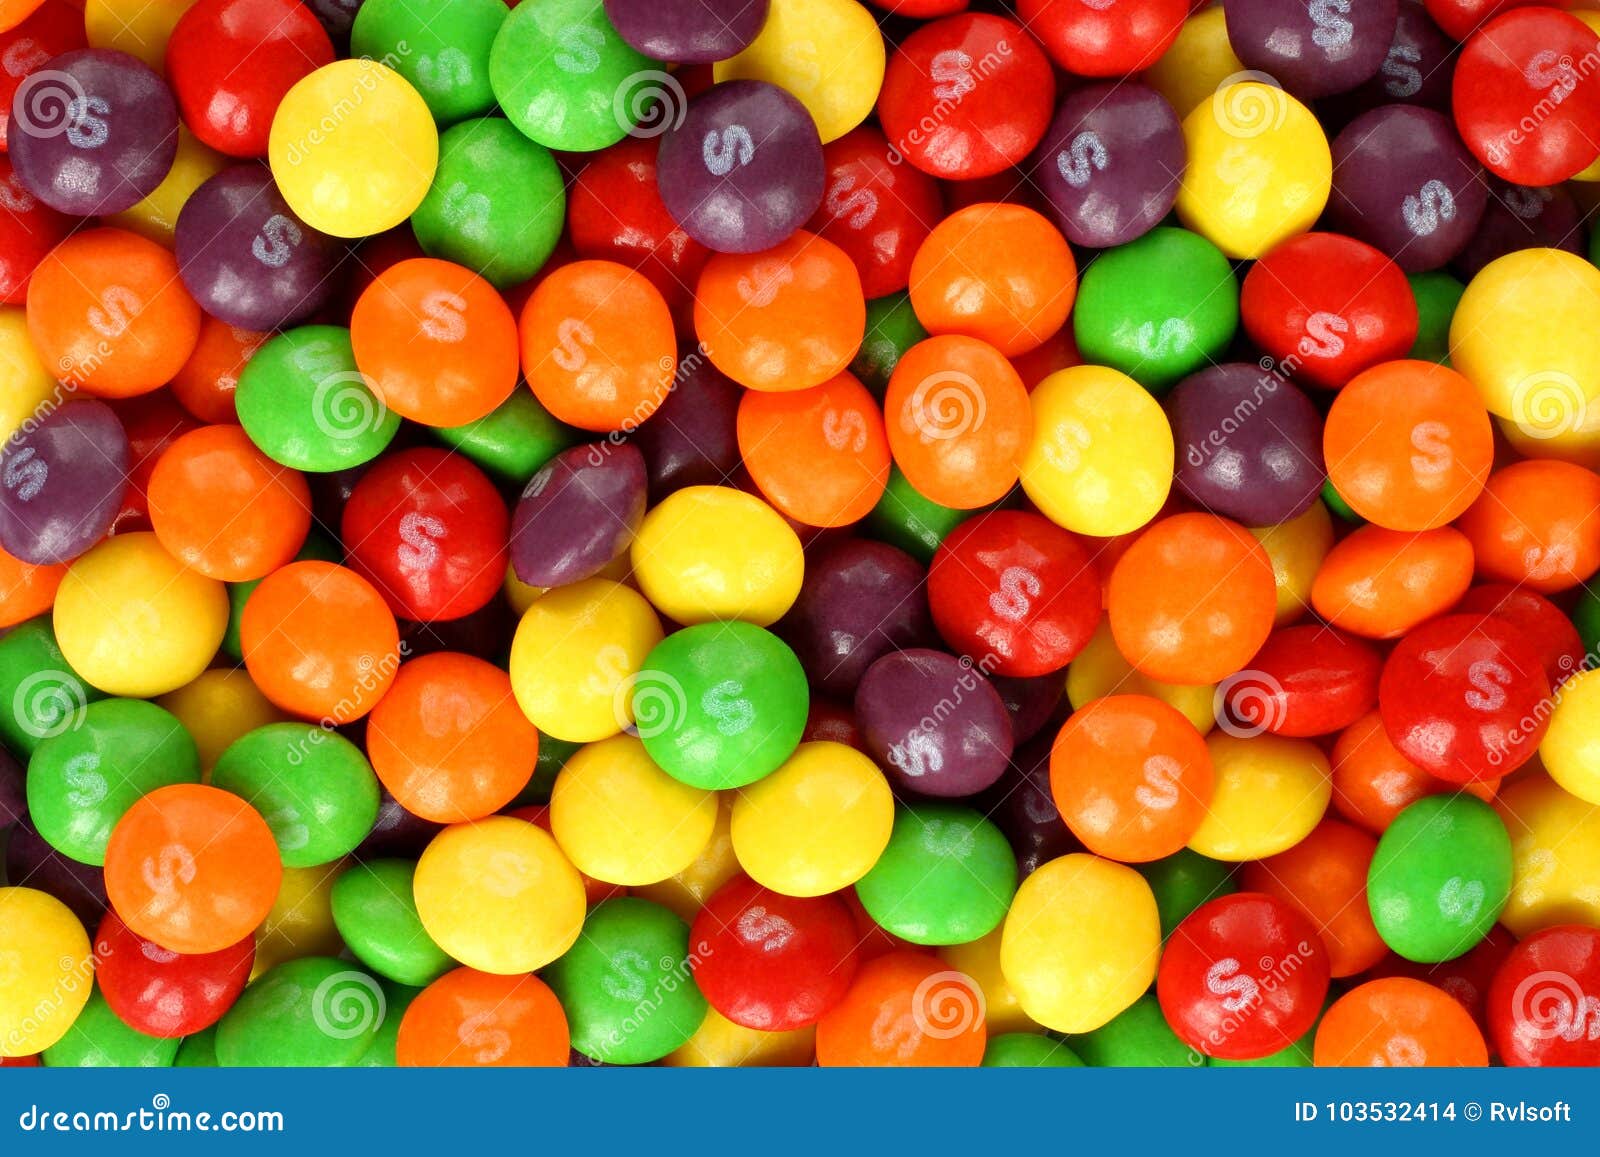 adel awara reccomend picture of skittles pic